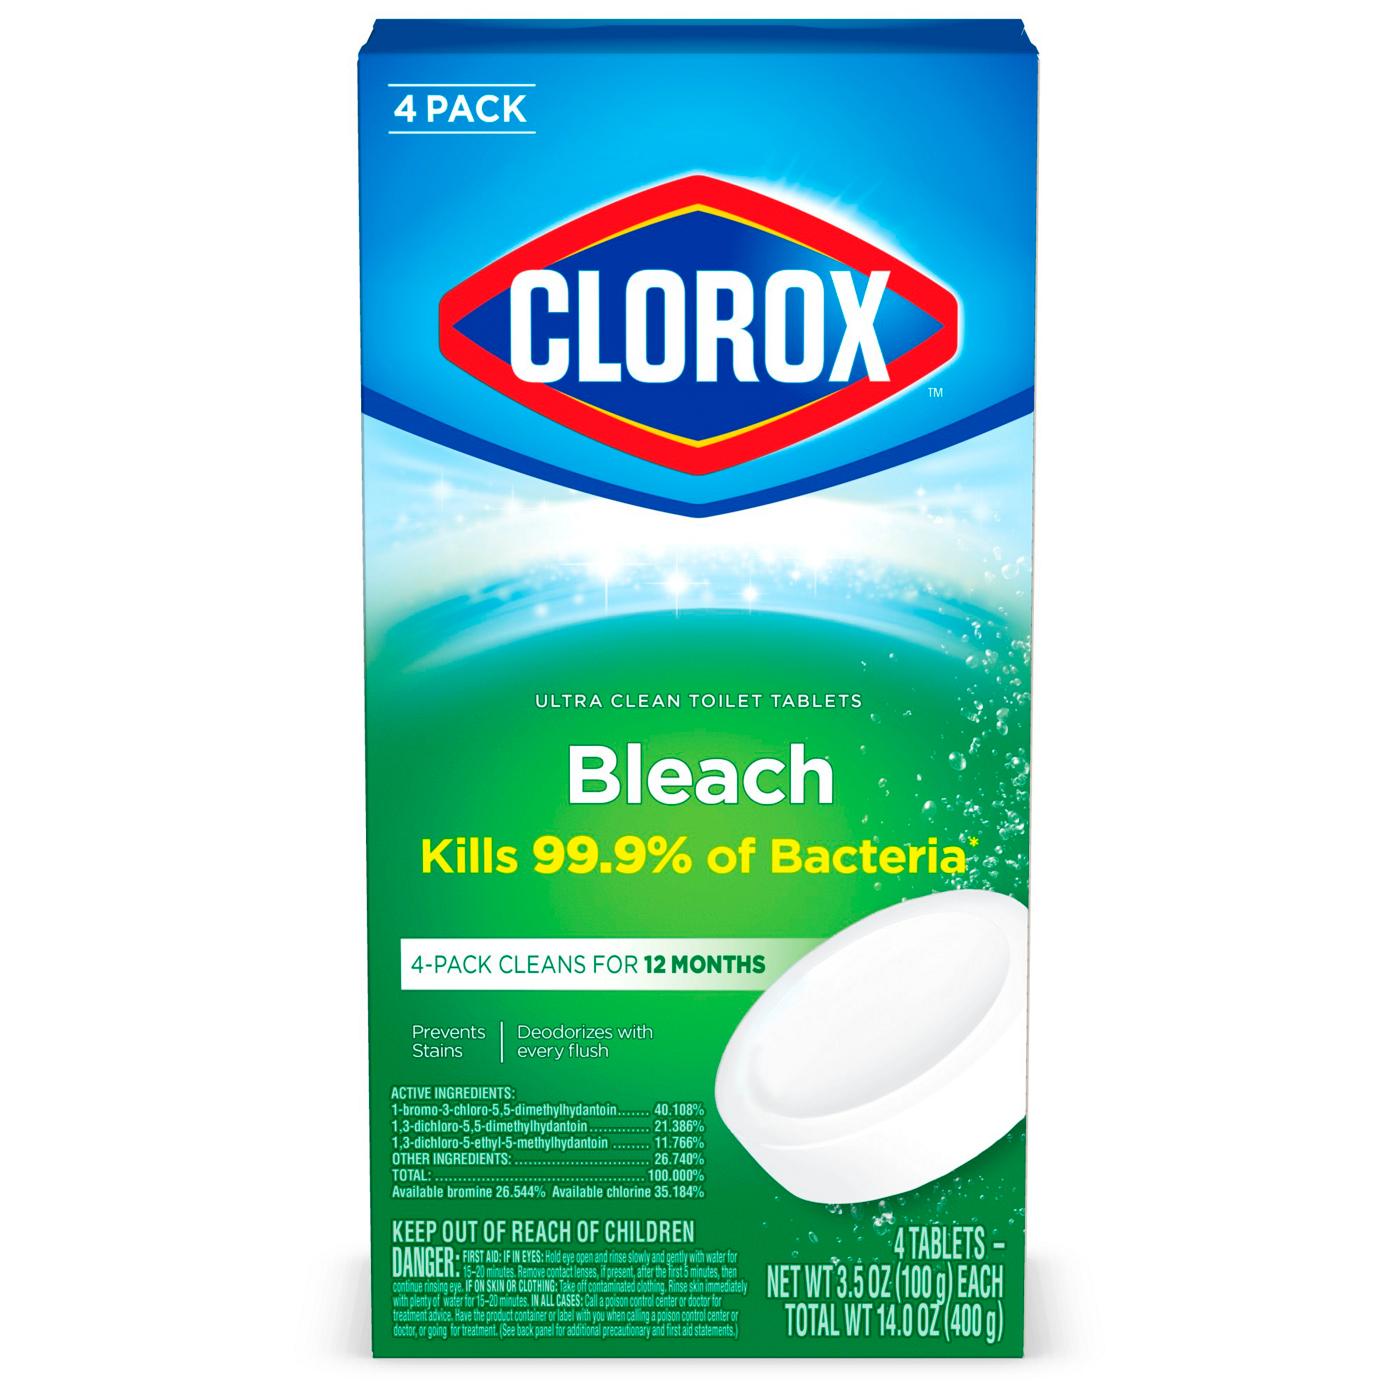 Clorox Bleach Ultra Clean Toilet Tablets; image 1 of 9